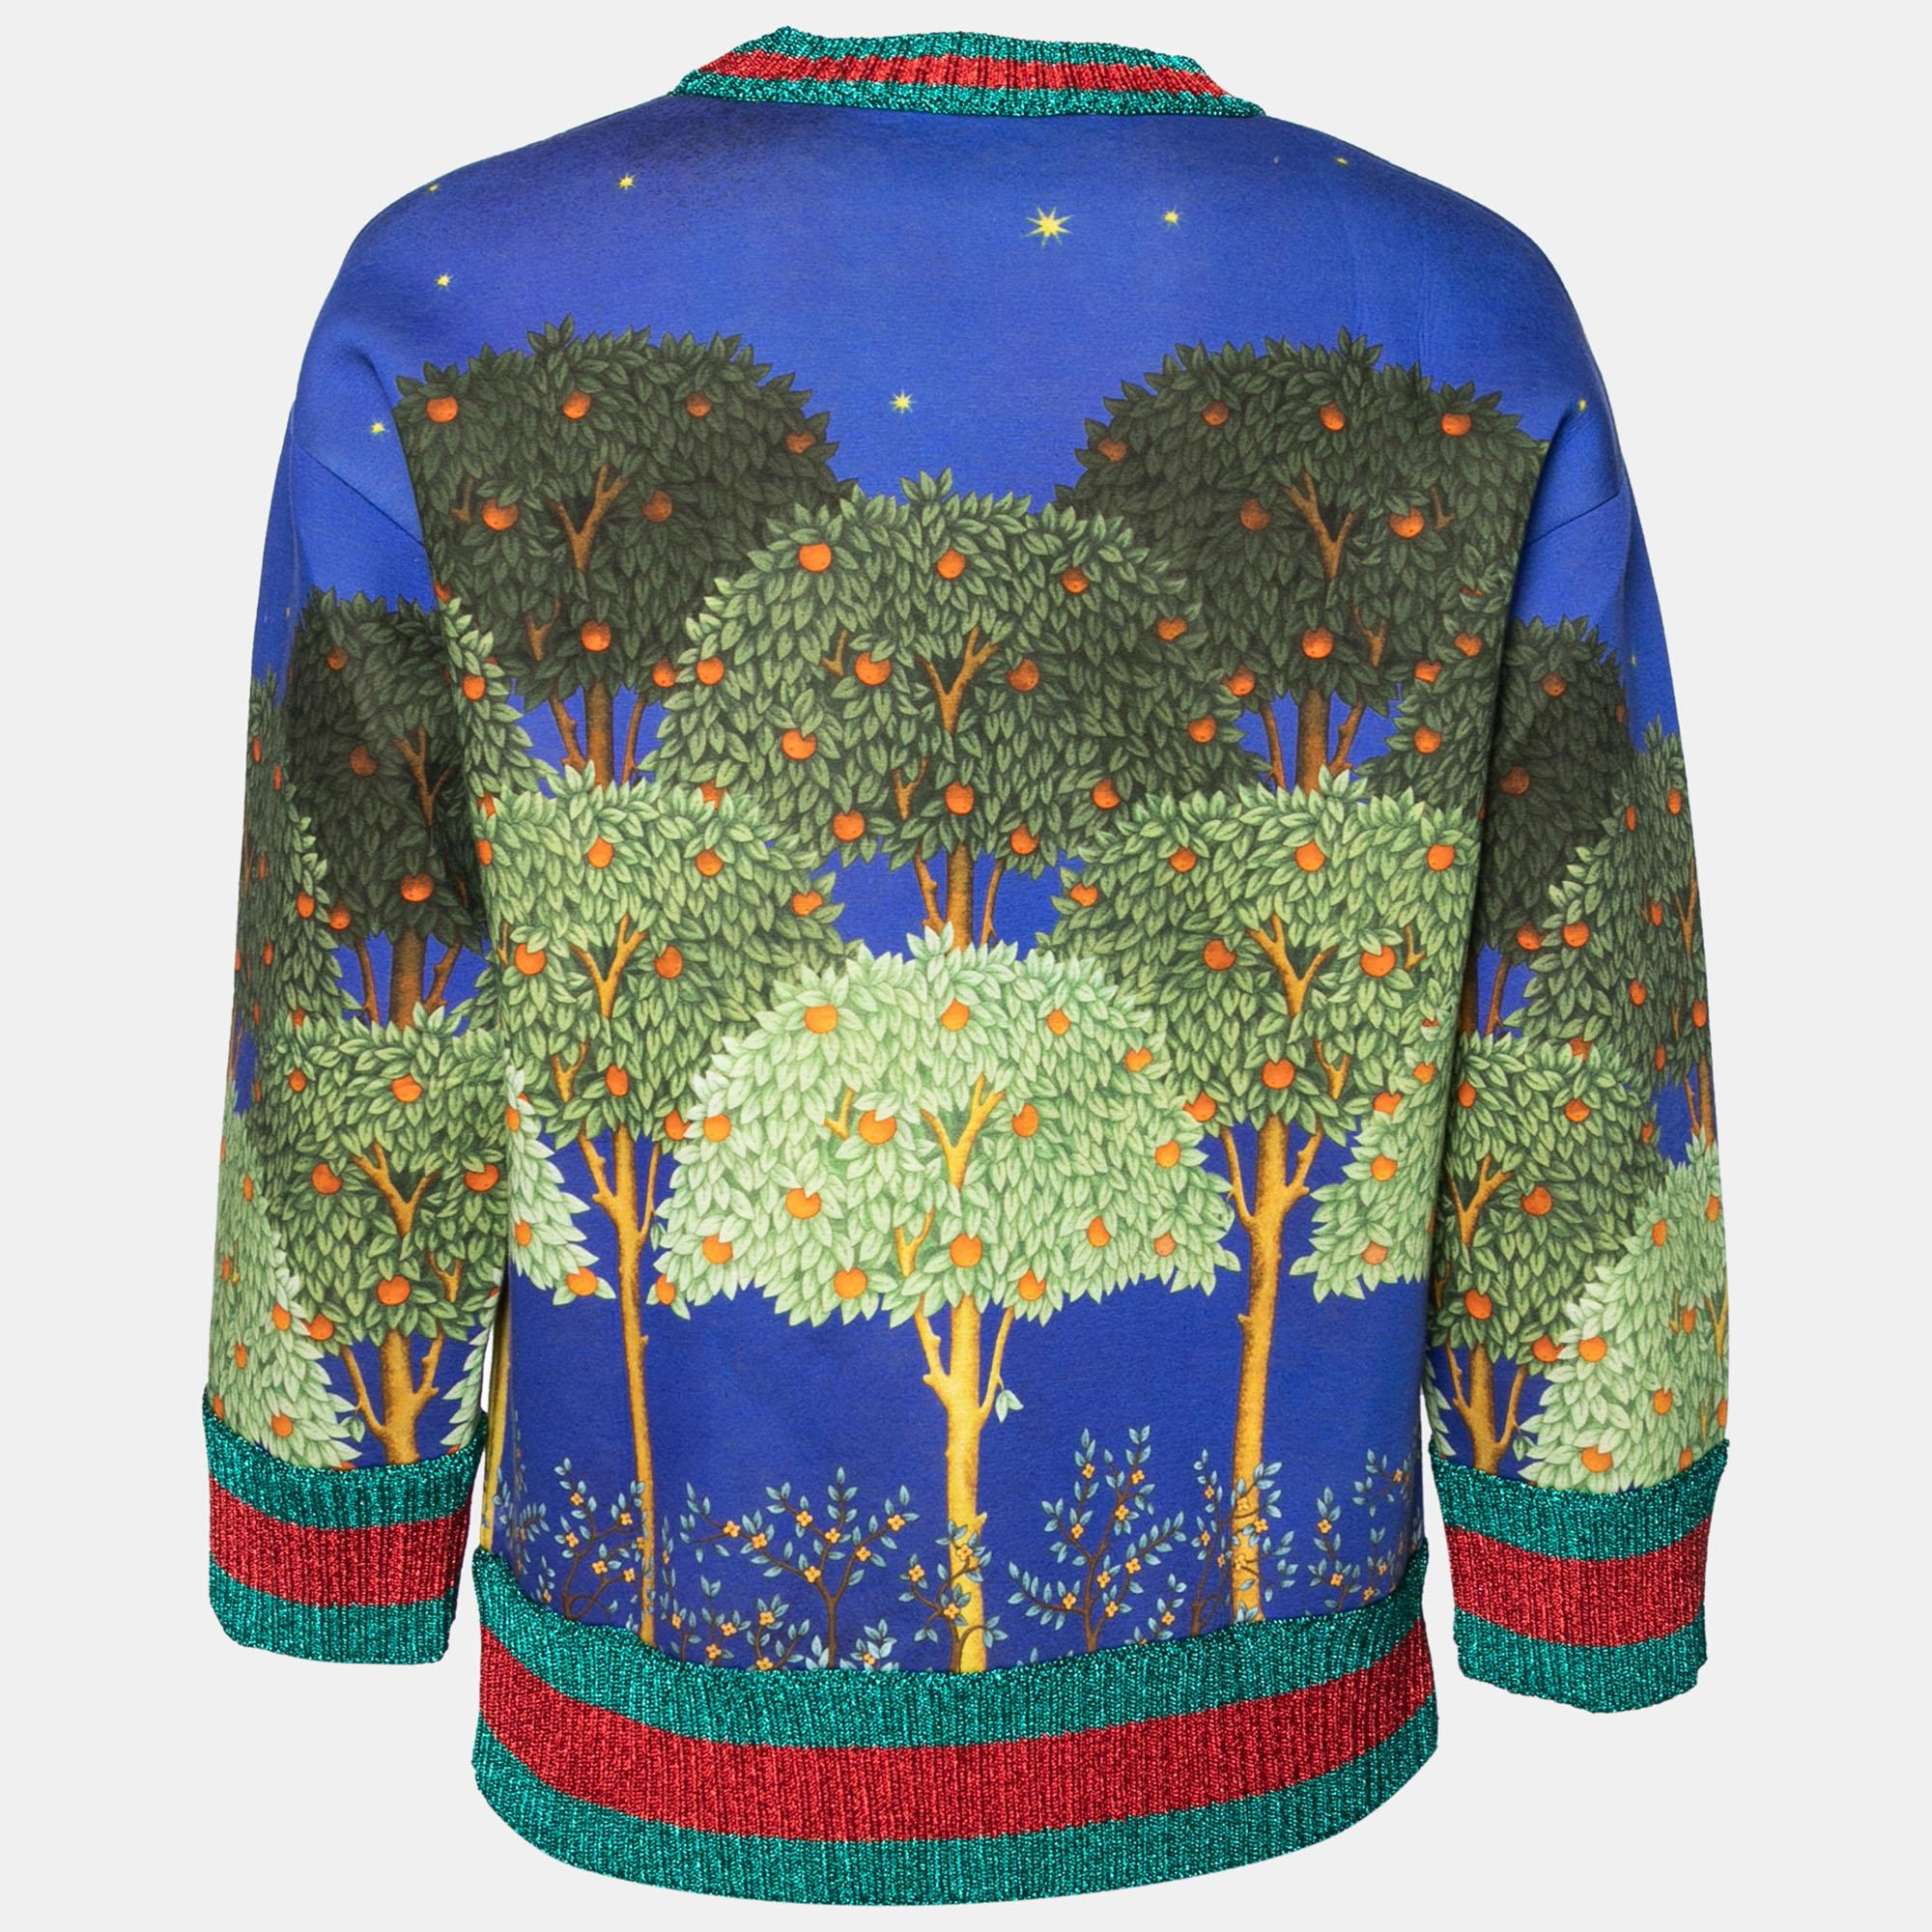 Each of Gucci's creations exhibits signature beauty, elegance, and luxury. This sweatshirt from Gucci will make a luxurious addition to your closet. It is made from blue cotton fabric, with a multicolored Night Garden print augmenting its